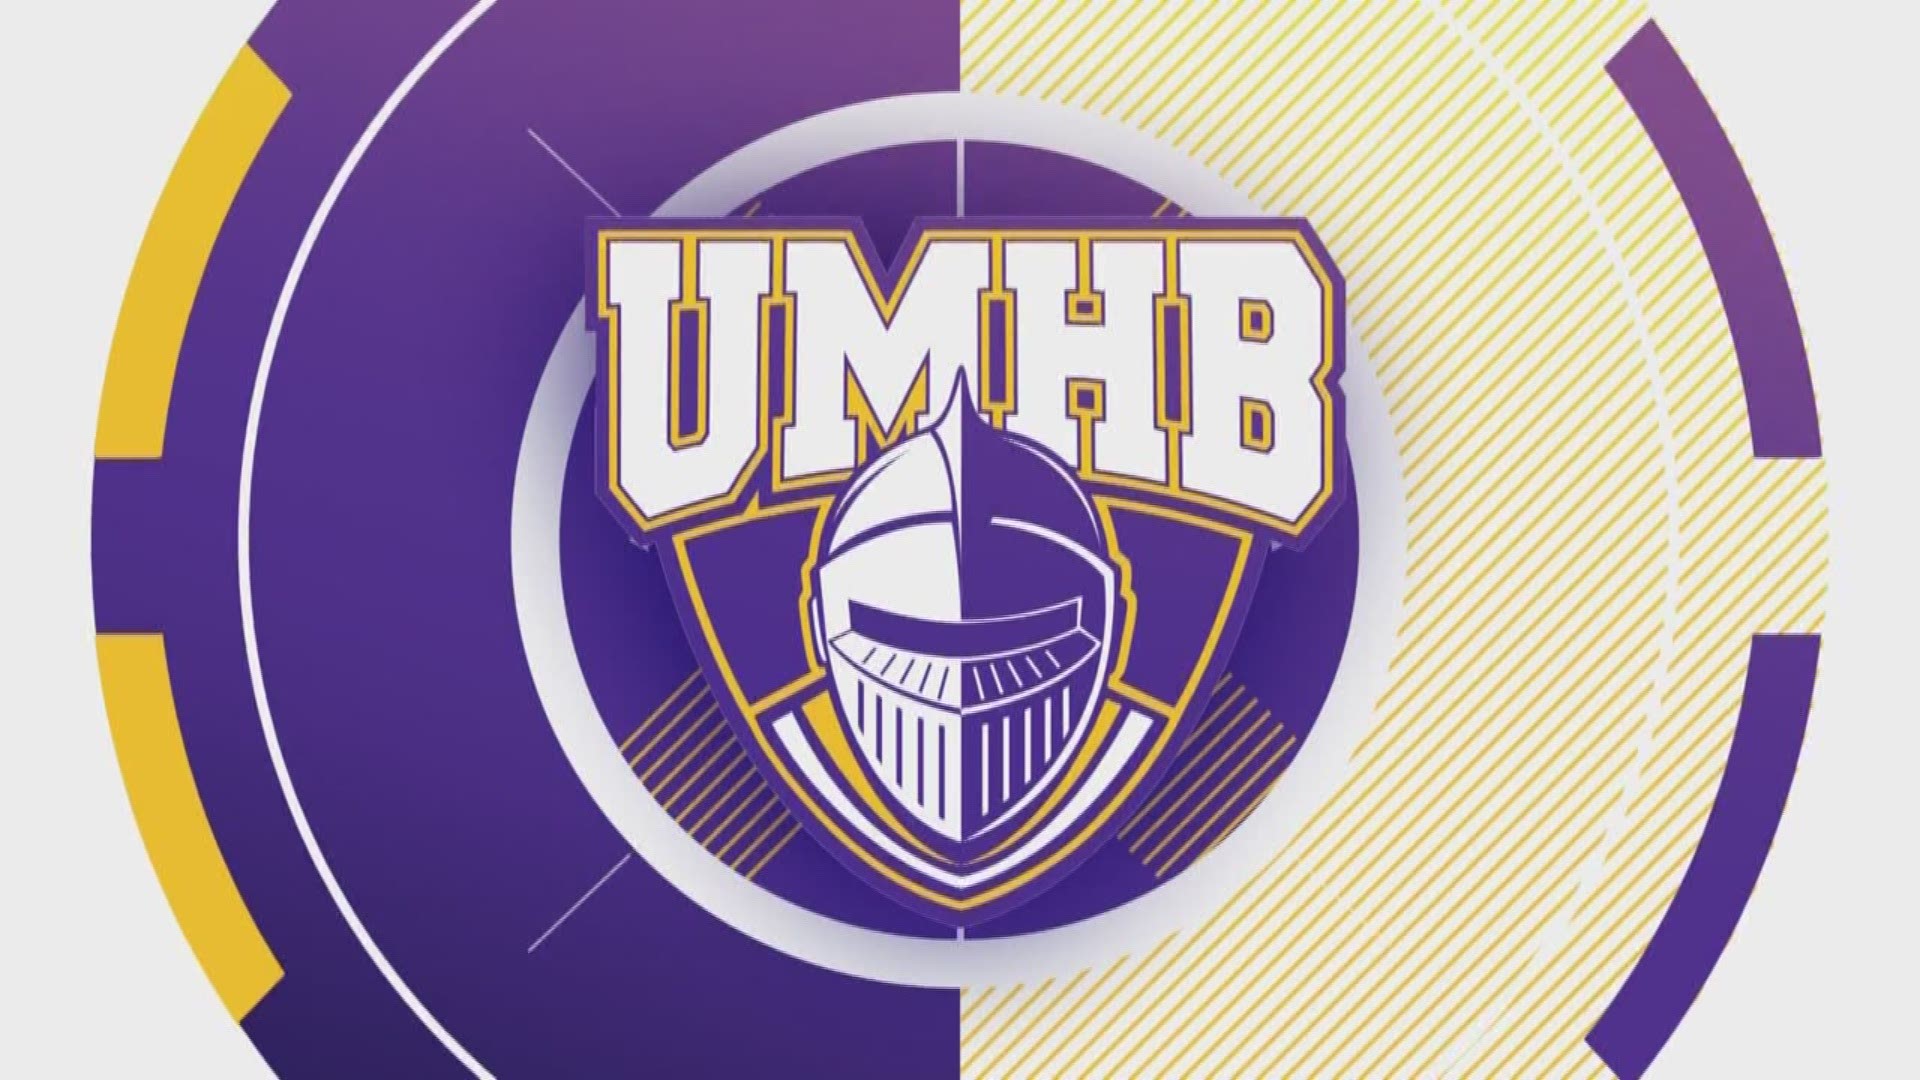 For the fourth straight year, UMHB finished the season with a perfect 10-0 record.